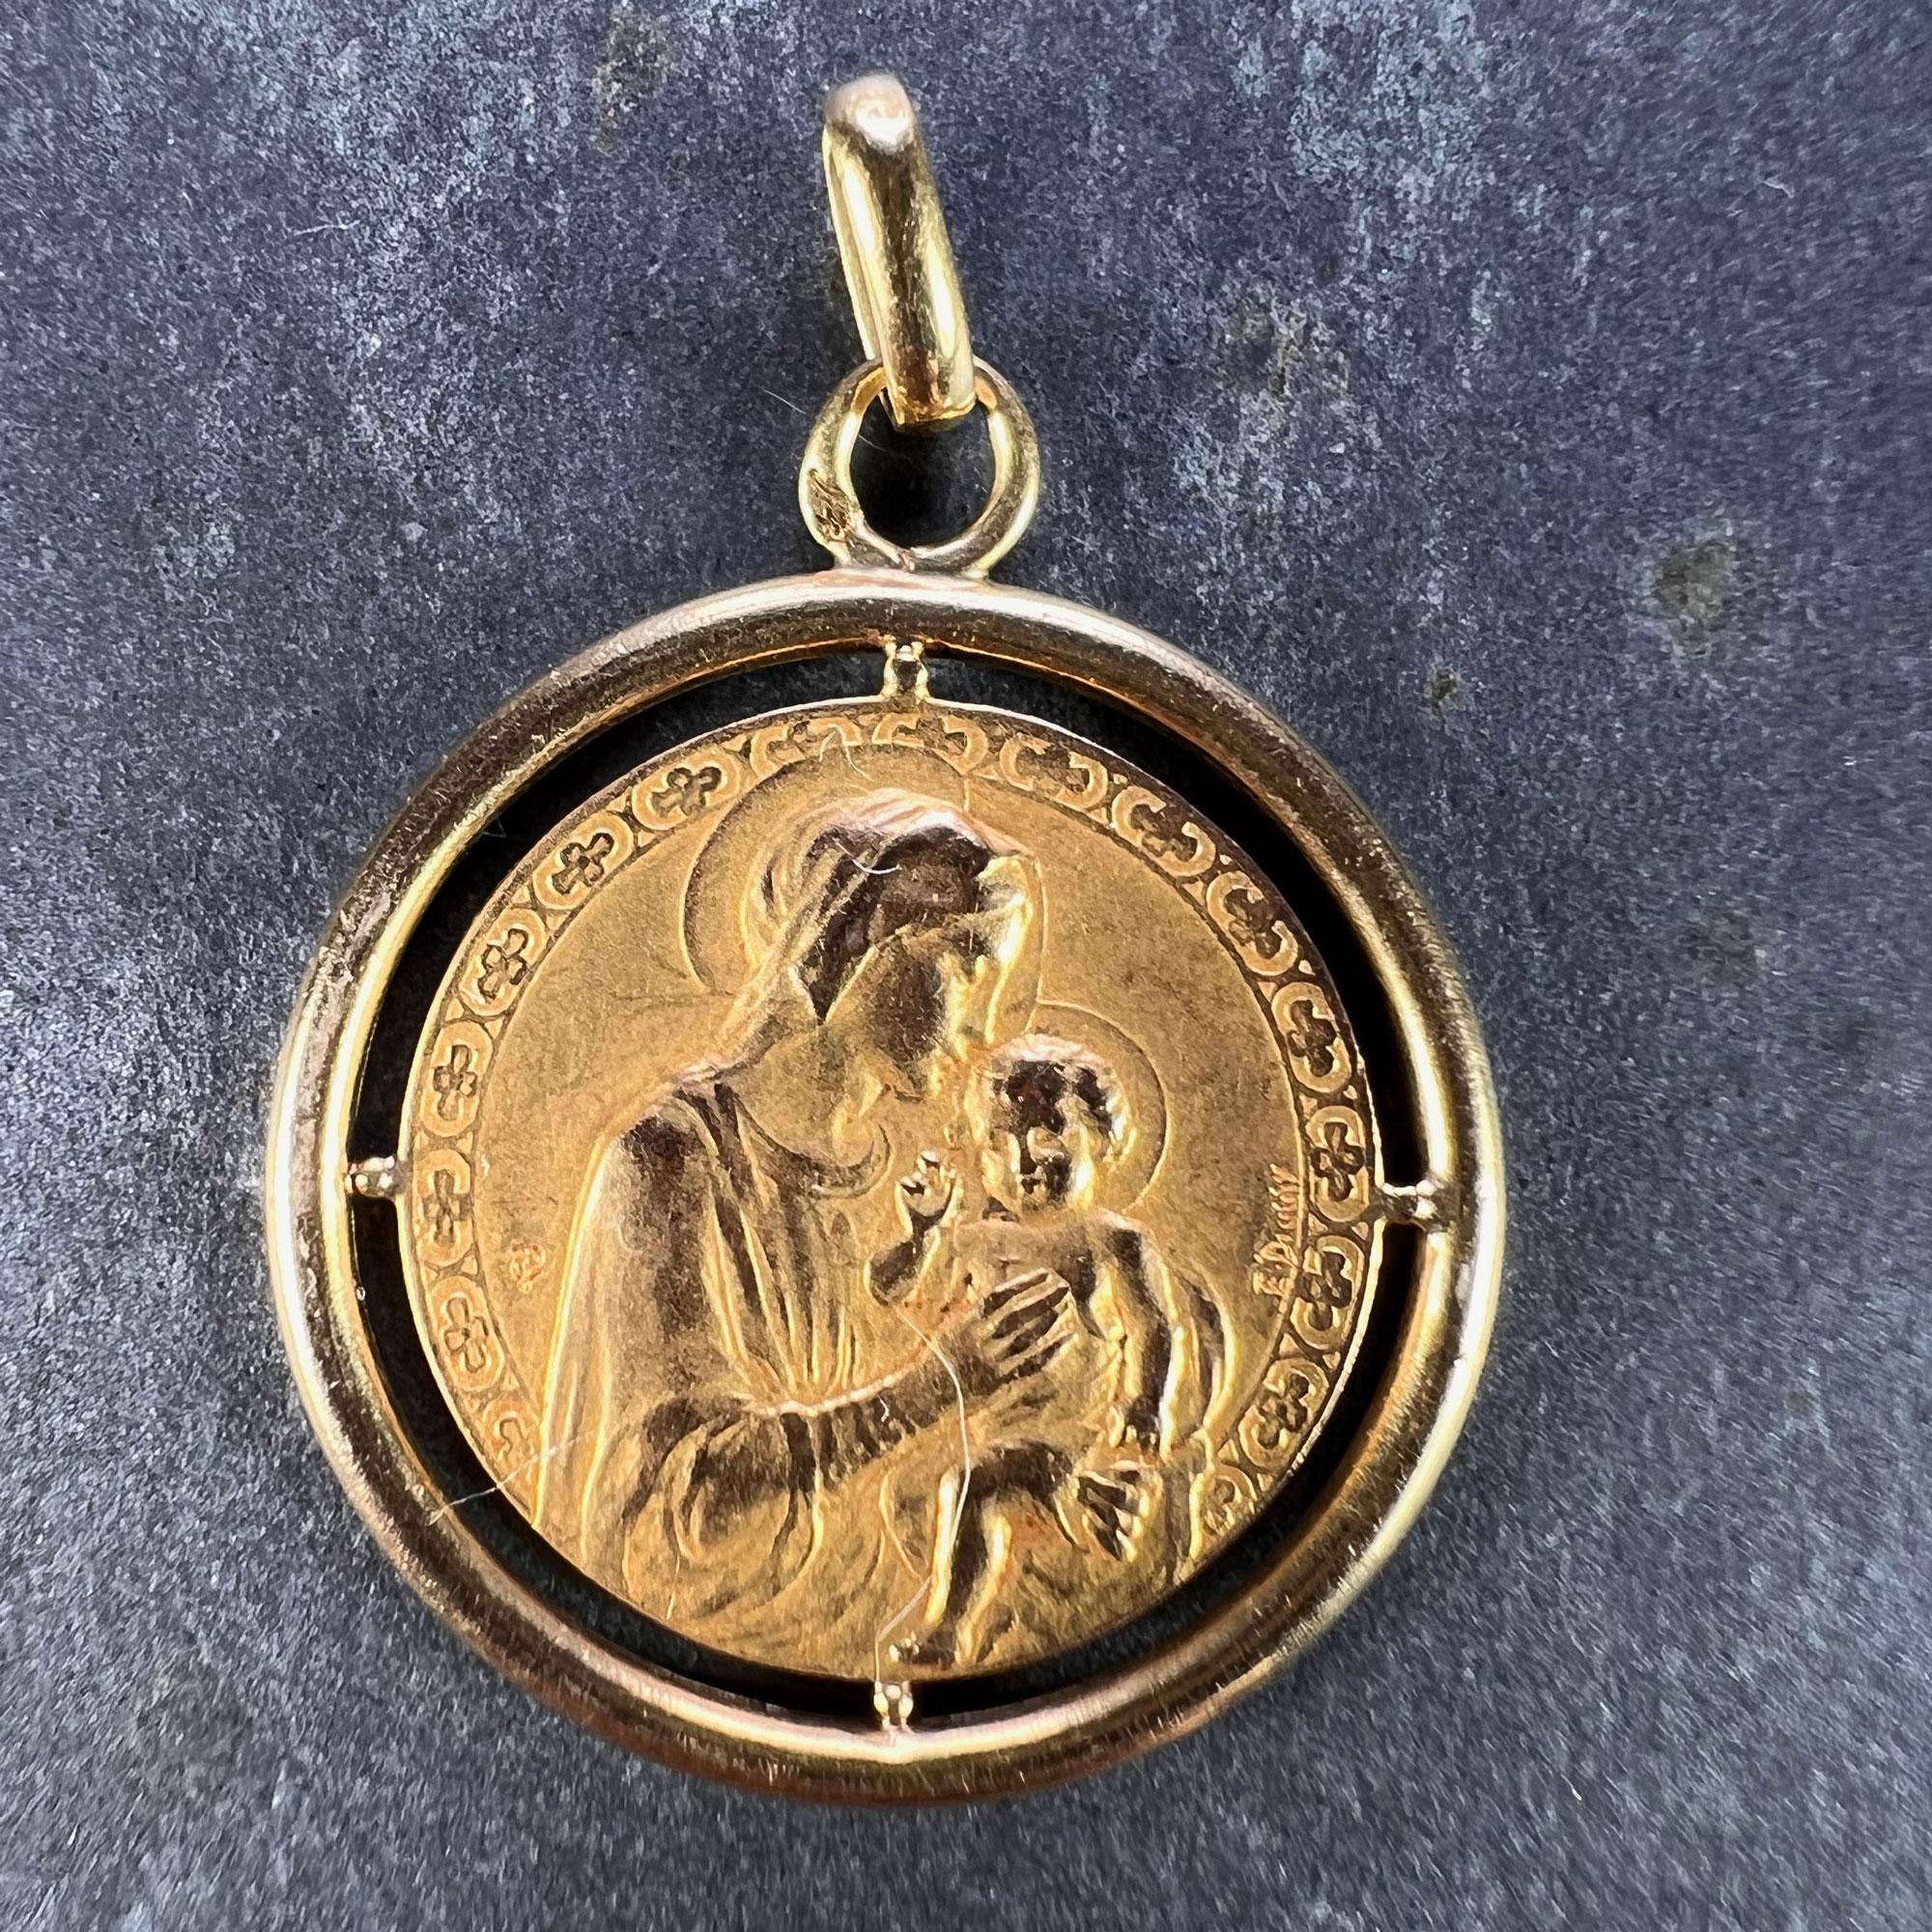 A French 18 karat (18K) yellow gold charm pendant designed as a medal depicting the Madonna and Child within a border of quatrefoils signed by E. Dropsy, surrounded by a yellow frame. The reverse features a rose in full bloom and is engraved with